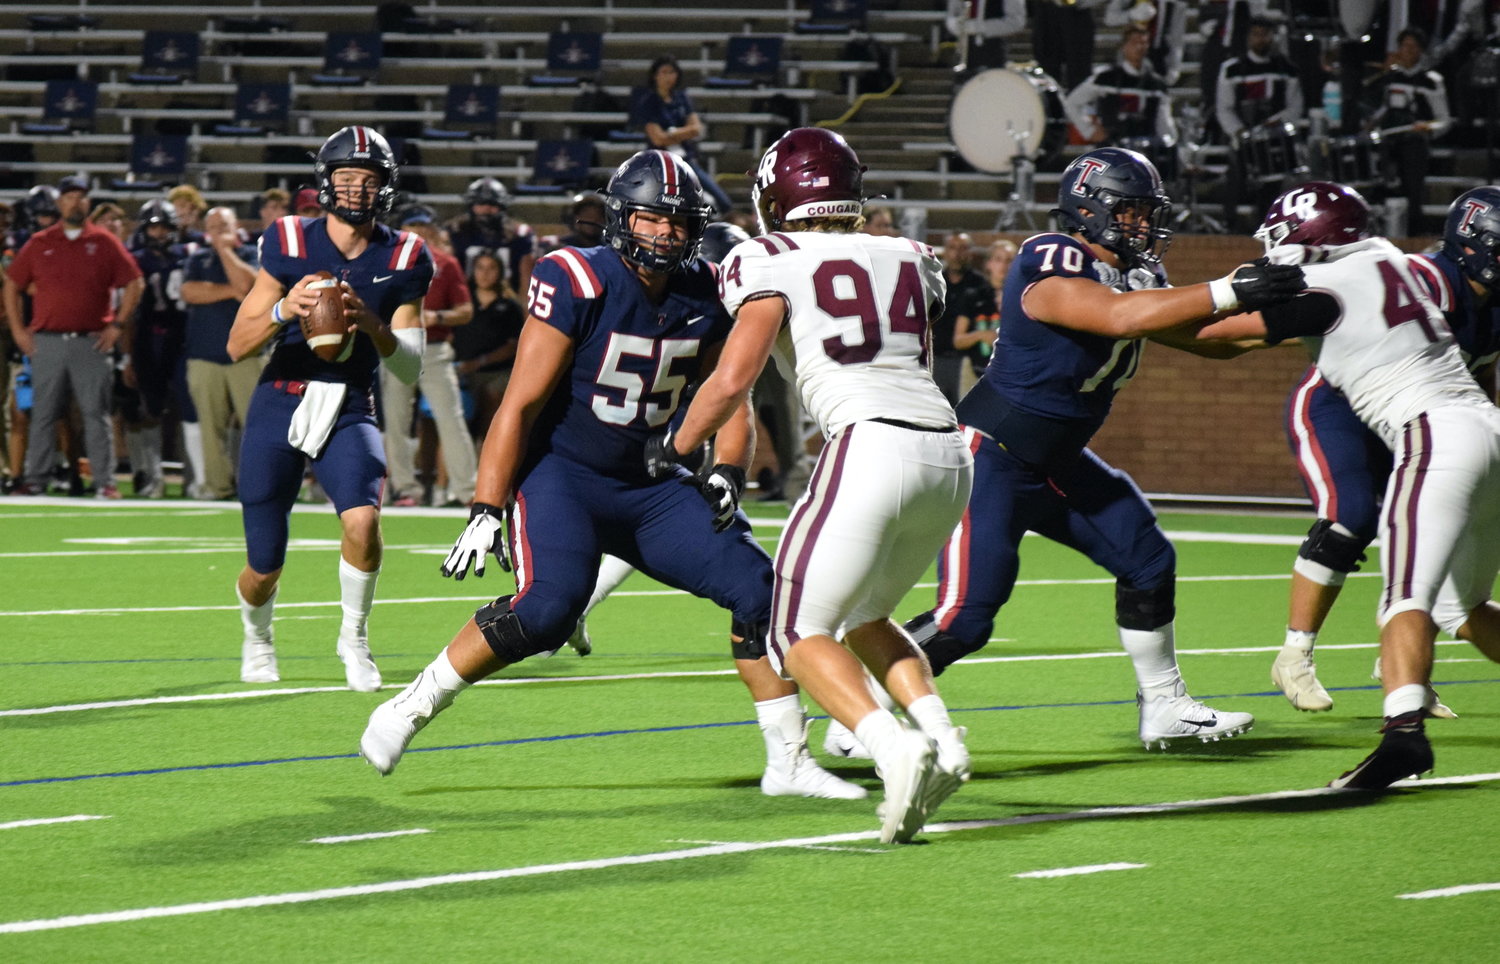 Cole Franis pump fakes before throwing the ball during a game against Cinco Ranch at Rhodes Stadium on Thursday.